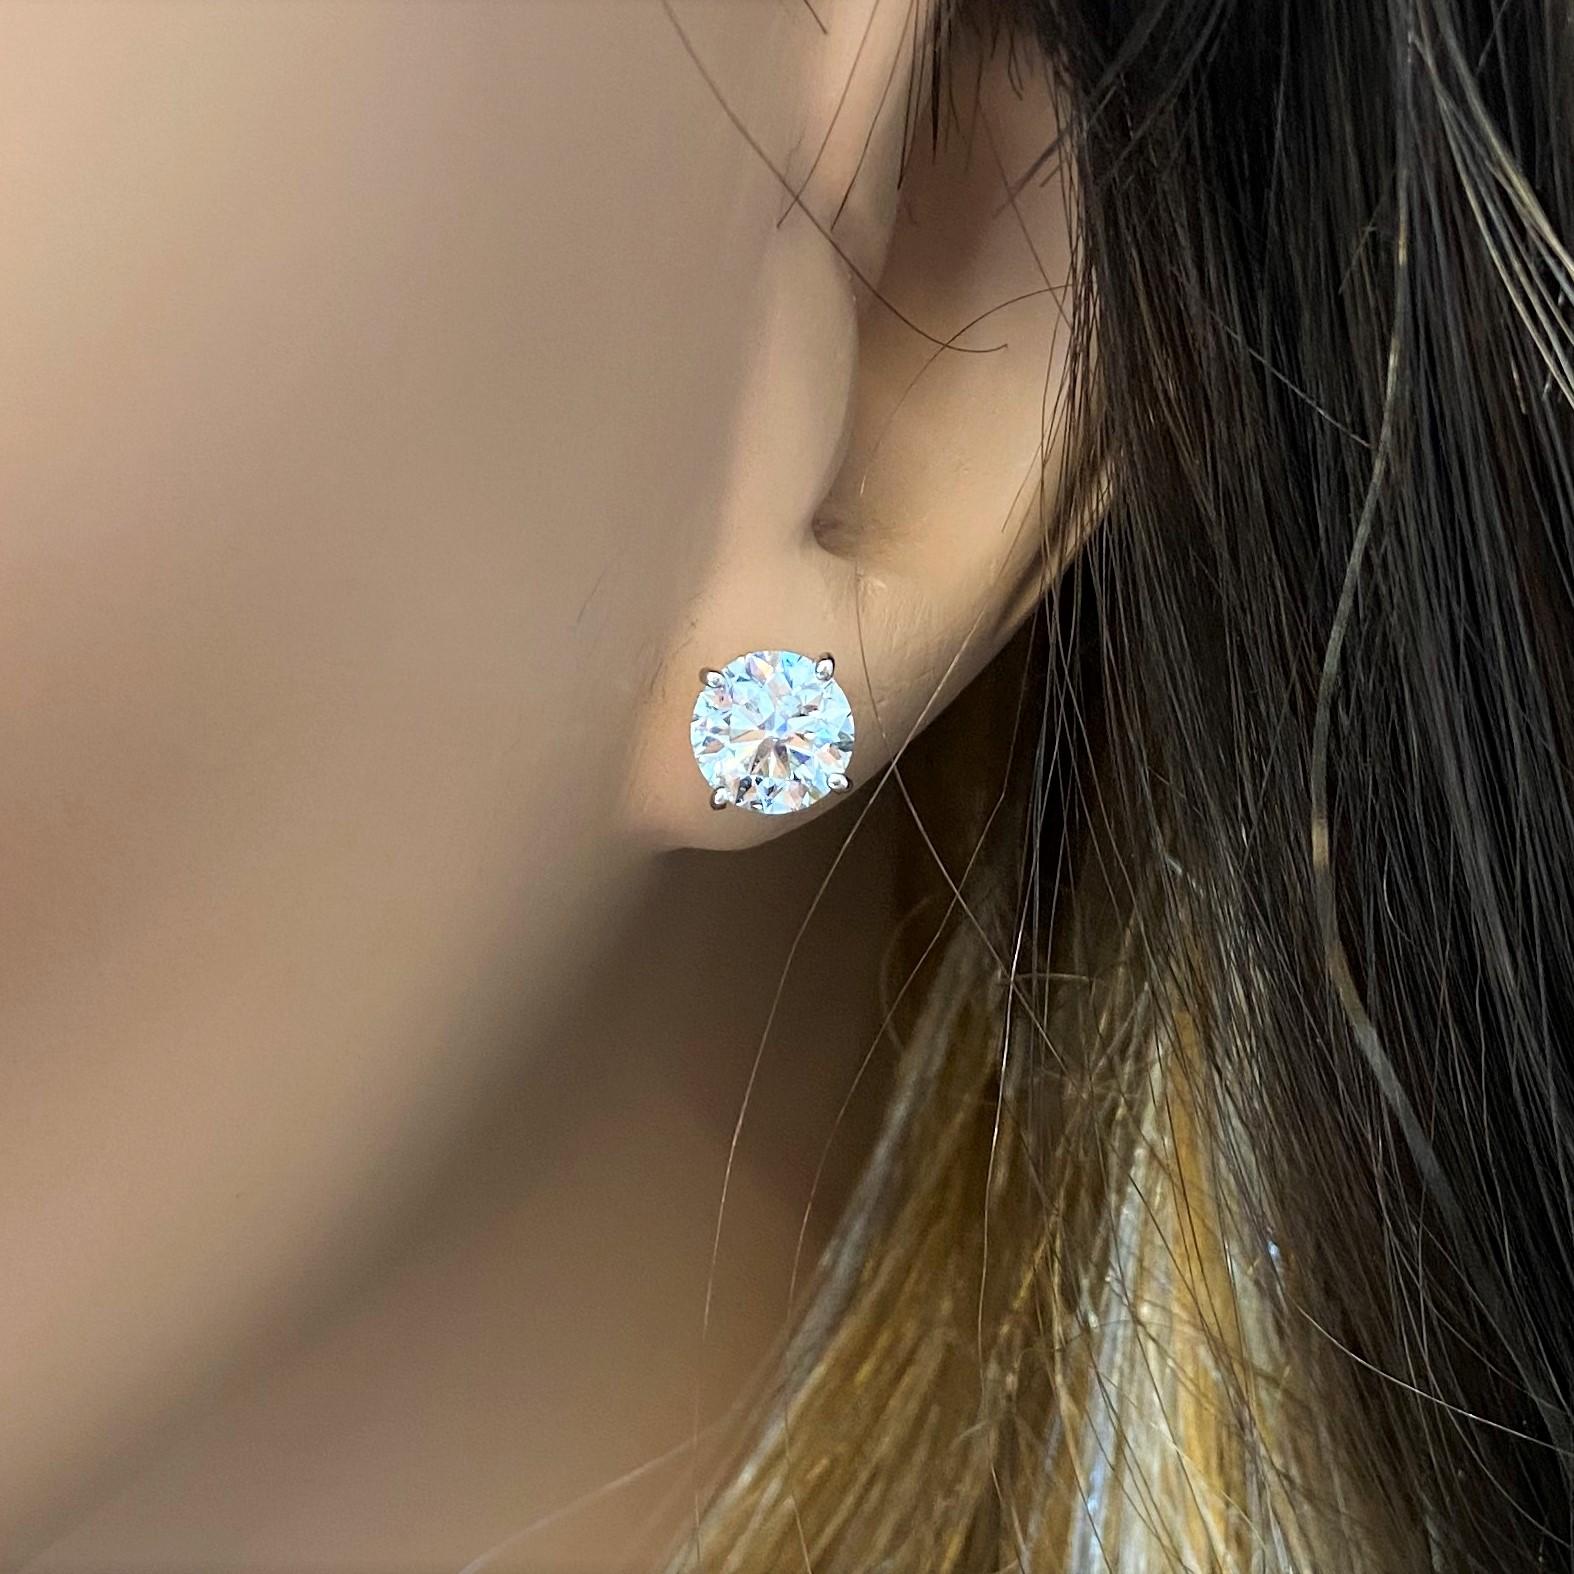 Stunning 14 Karat white gold handmade earrings featuring 2 round brilliant cut diamonds weighing 3.00cts total H-I color SI2 clarity. The stunning earrings measure 7.08mm in diameter, these gorgeous earrings are classic and timelessly elegant.
 Our